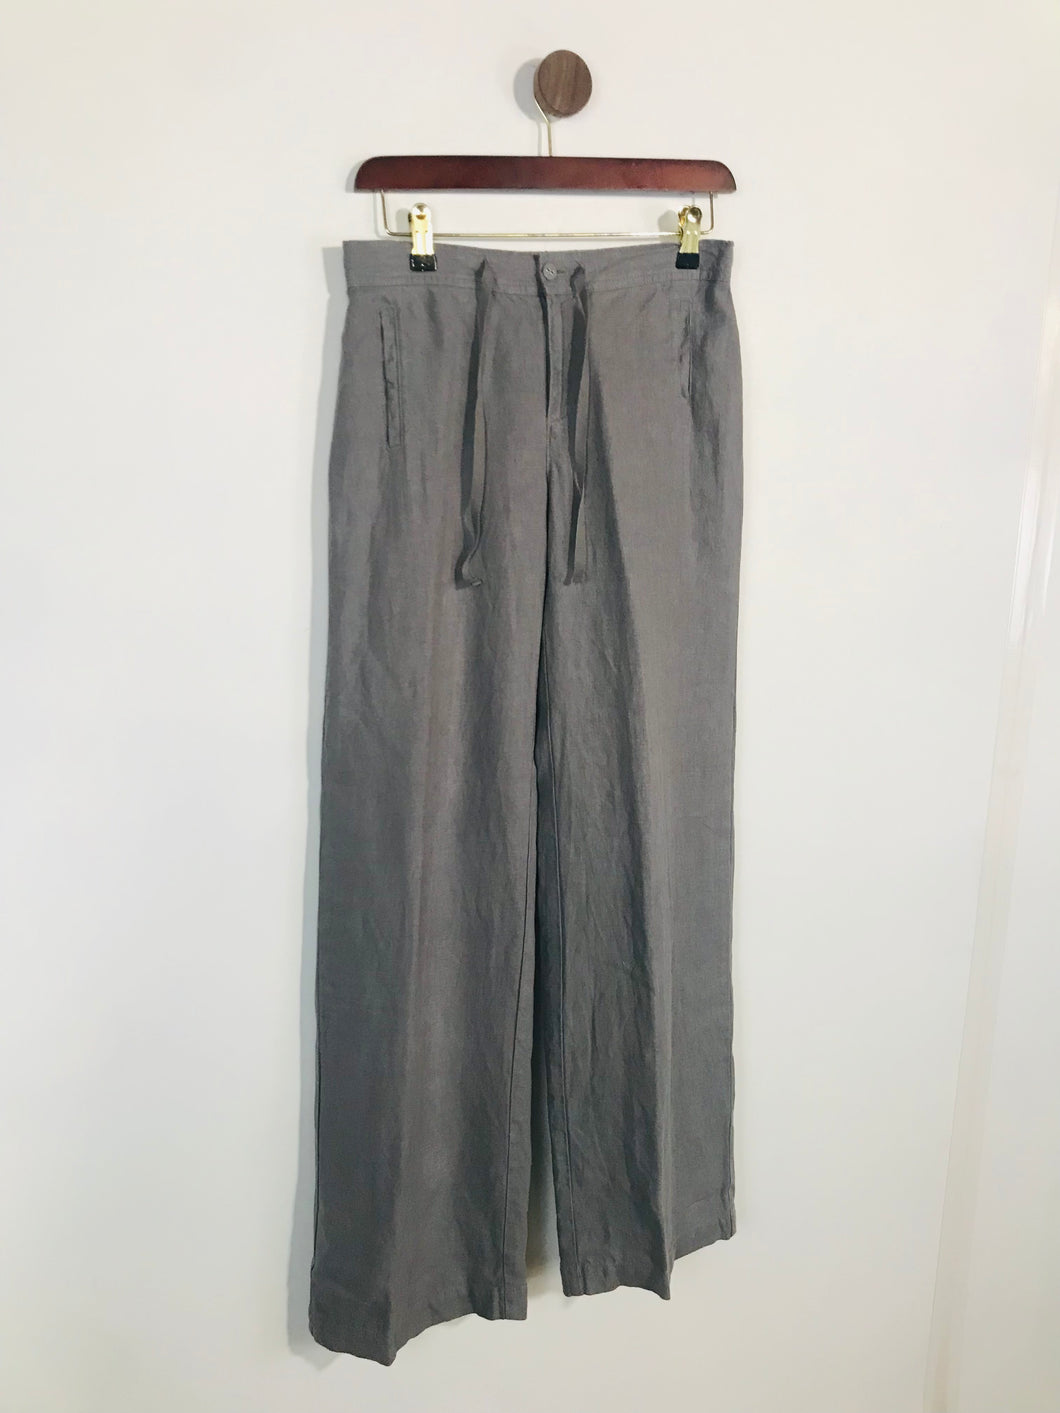 The White Company Women's Linen Casual Trousers | XS UK6-8 | Grey